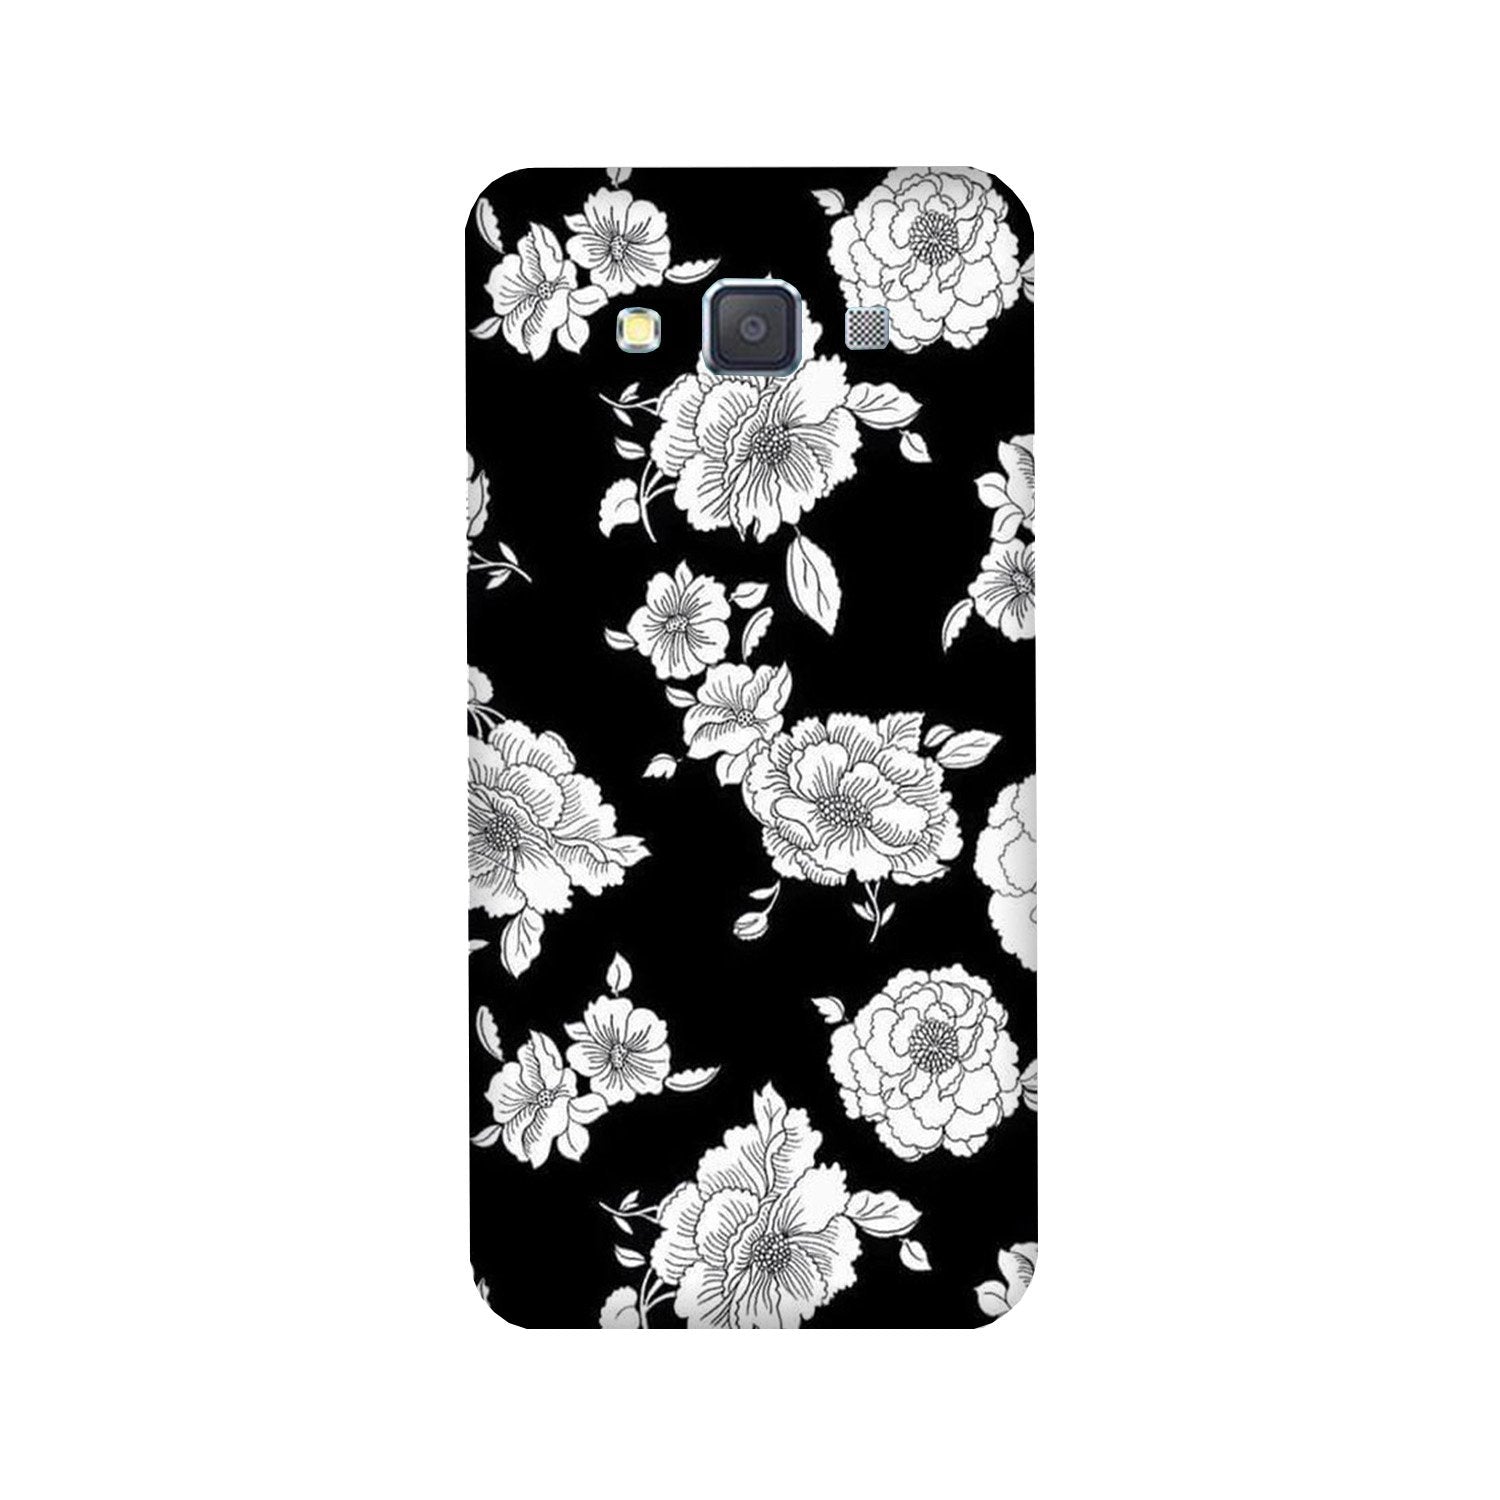 White flowers Black Background Case for Galaxy A3 (2015)